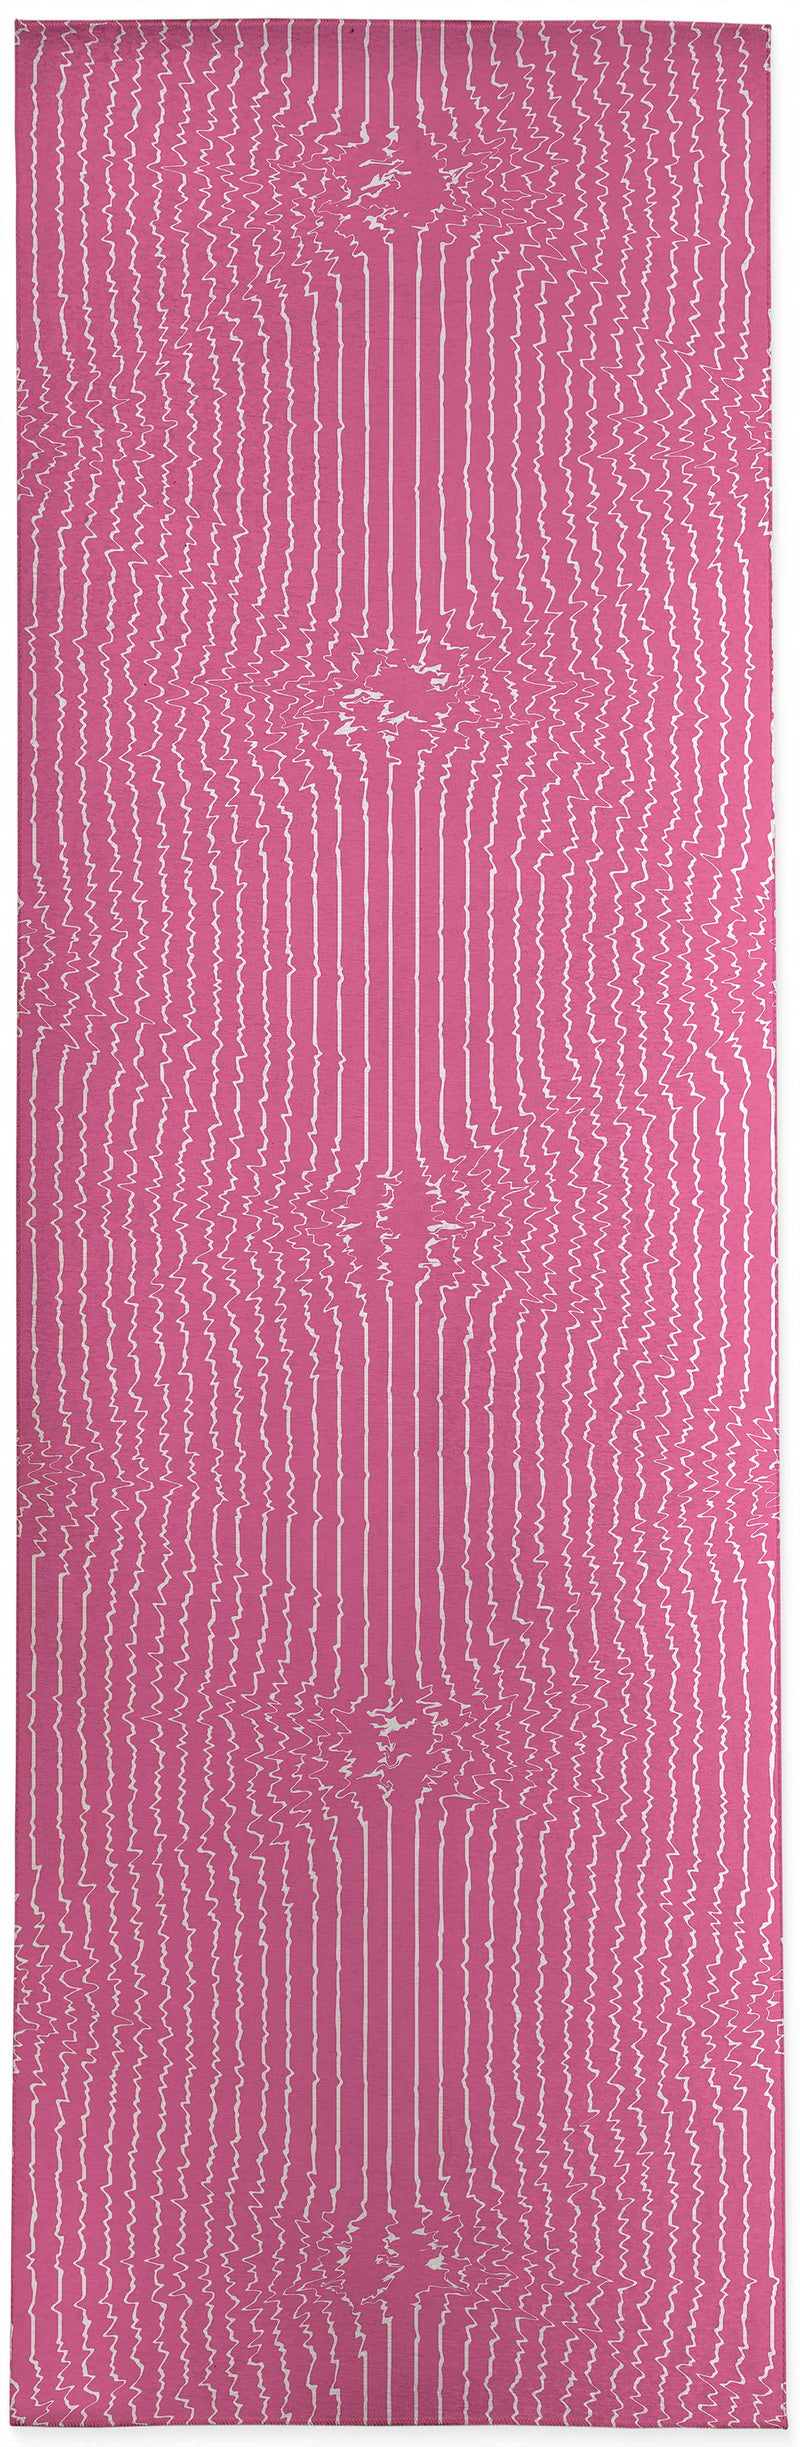 HAYWIRE Area Rug By Kavka Designs